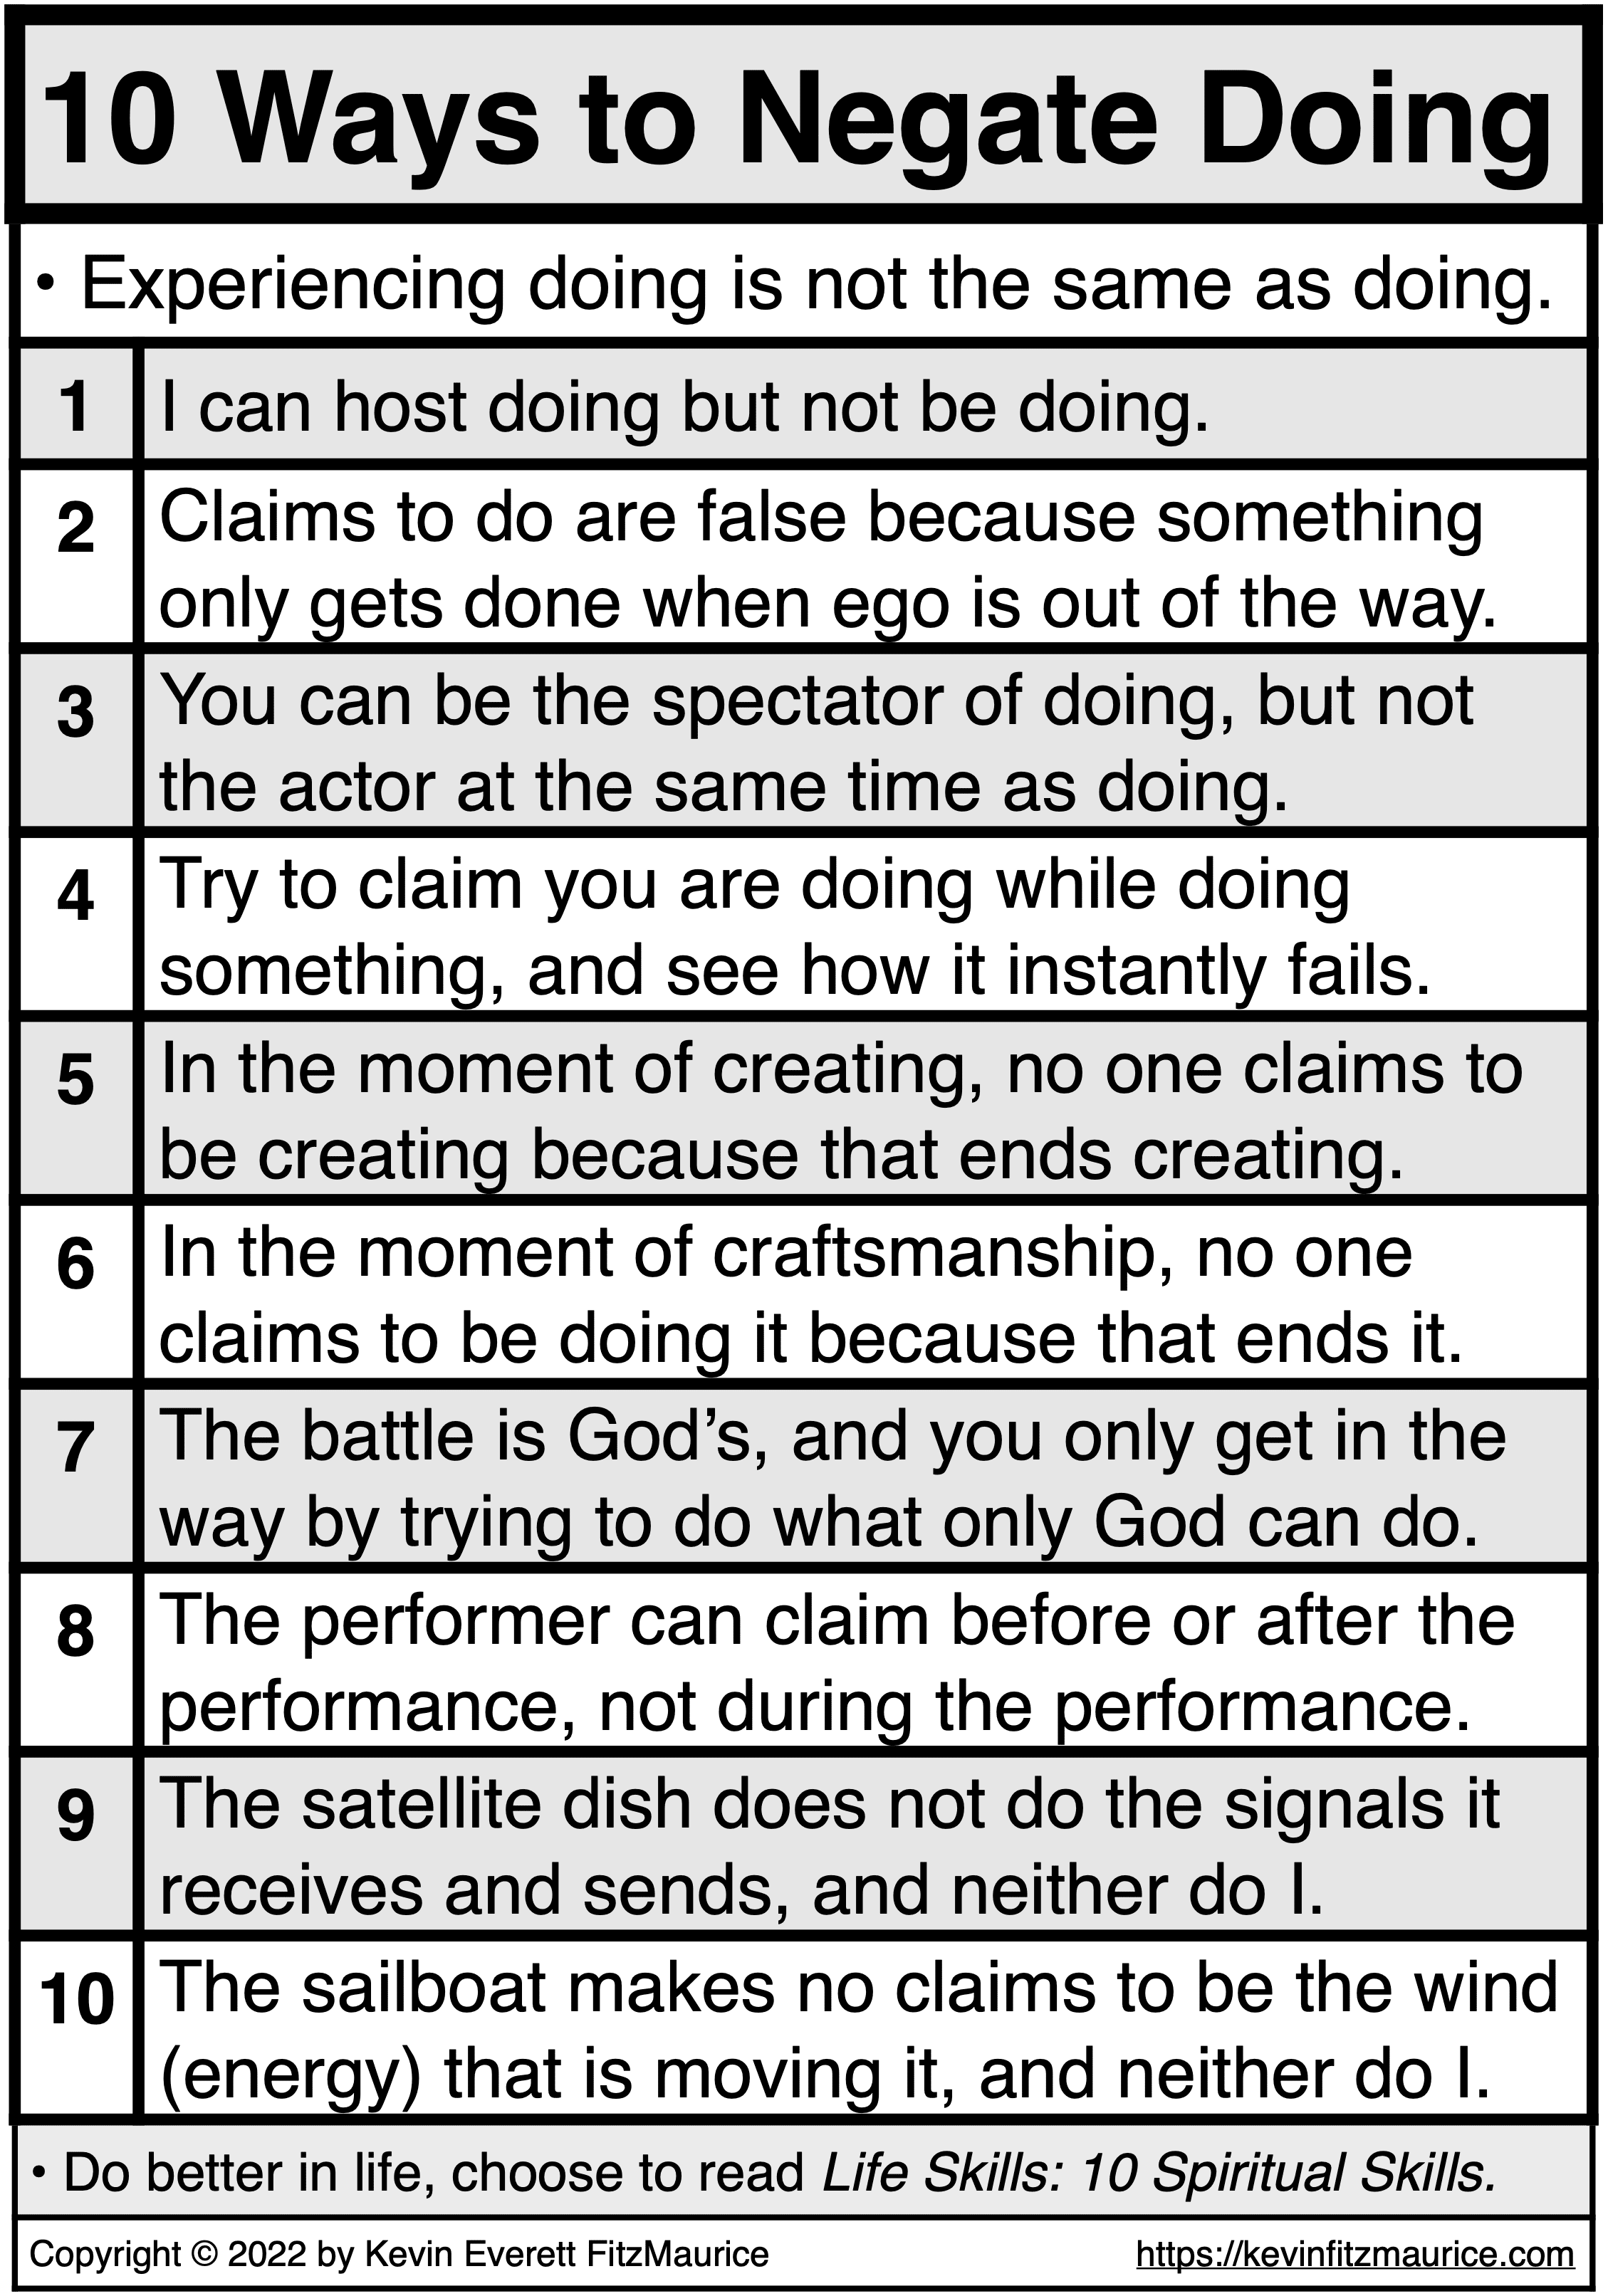 10 Ways to Negate Doing